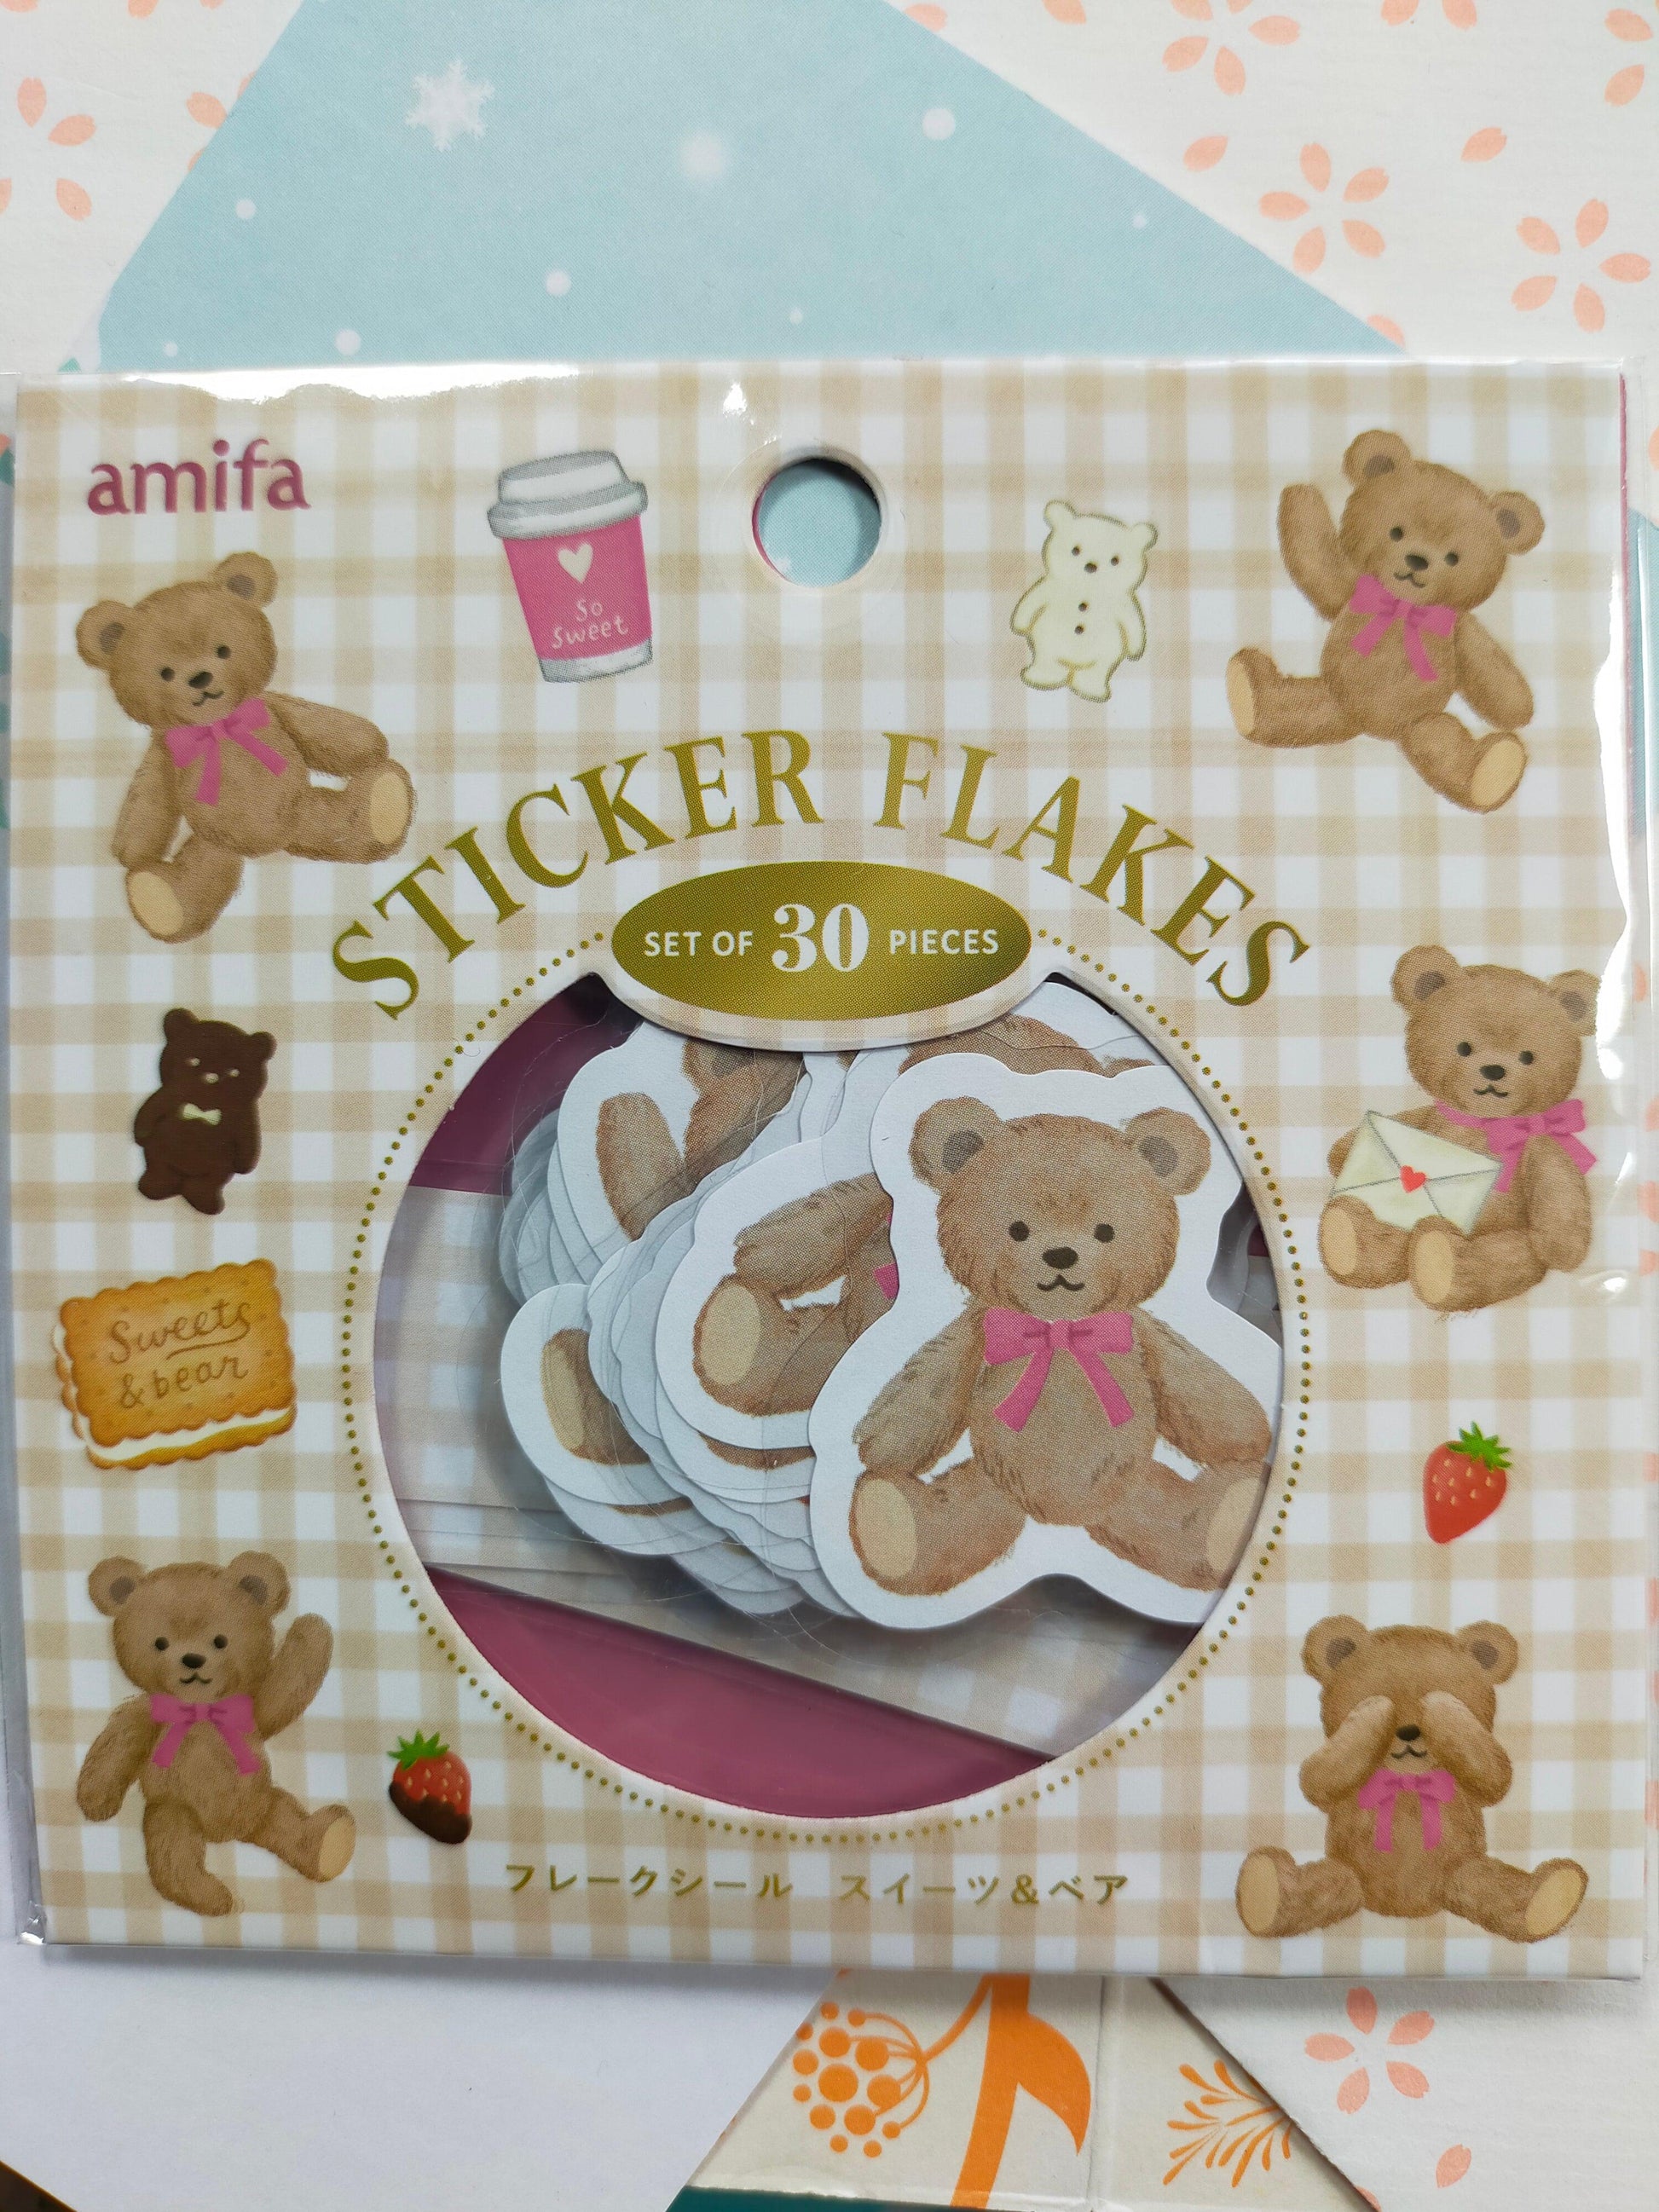 STICKER FLAKES Foil Stamping Motif 10designs*3pieces, amifa _ Cherry blossom / Antique / Bear / Melty Sky / Japanese Public Bath